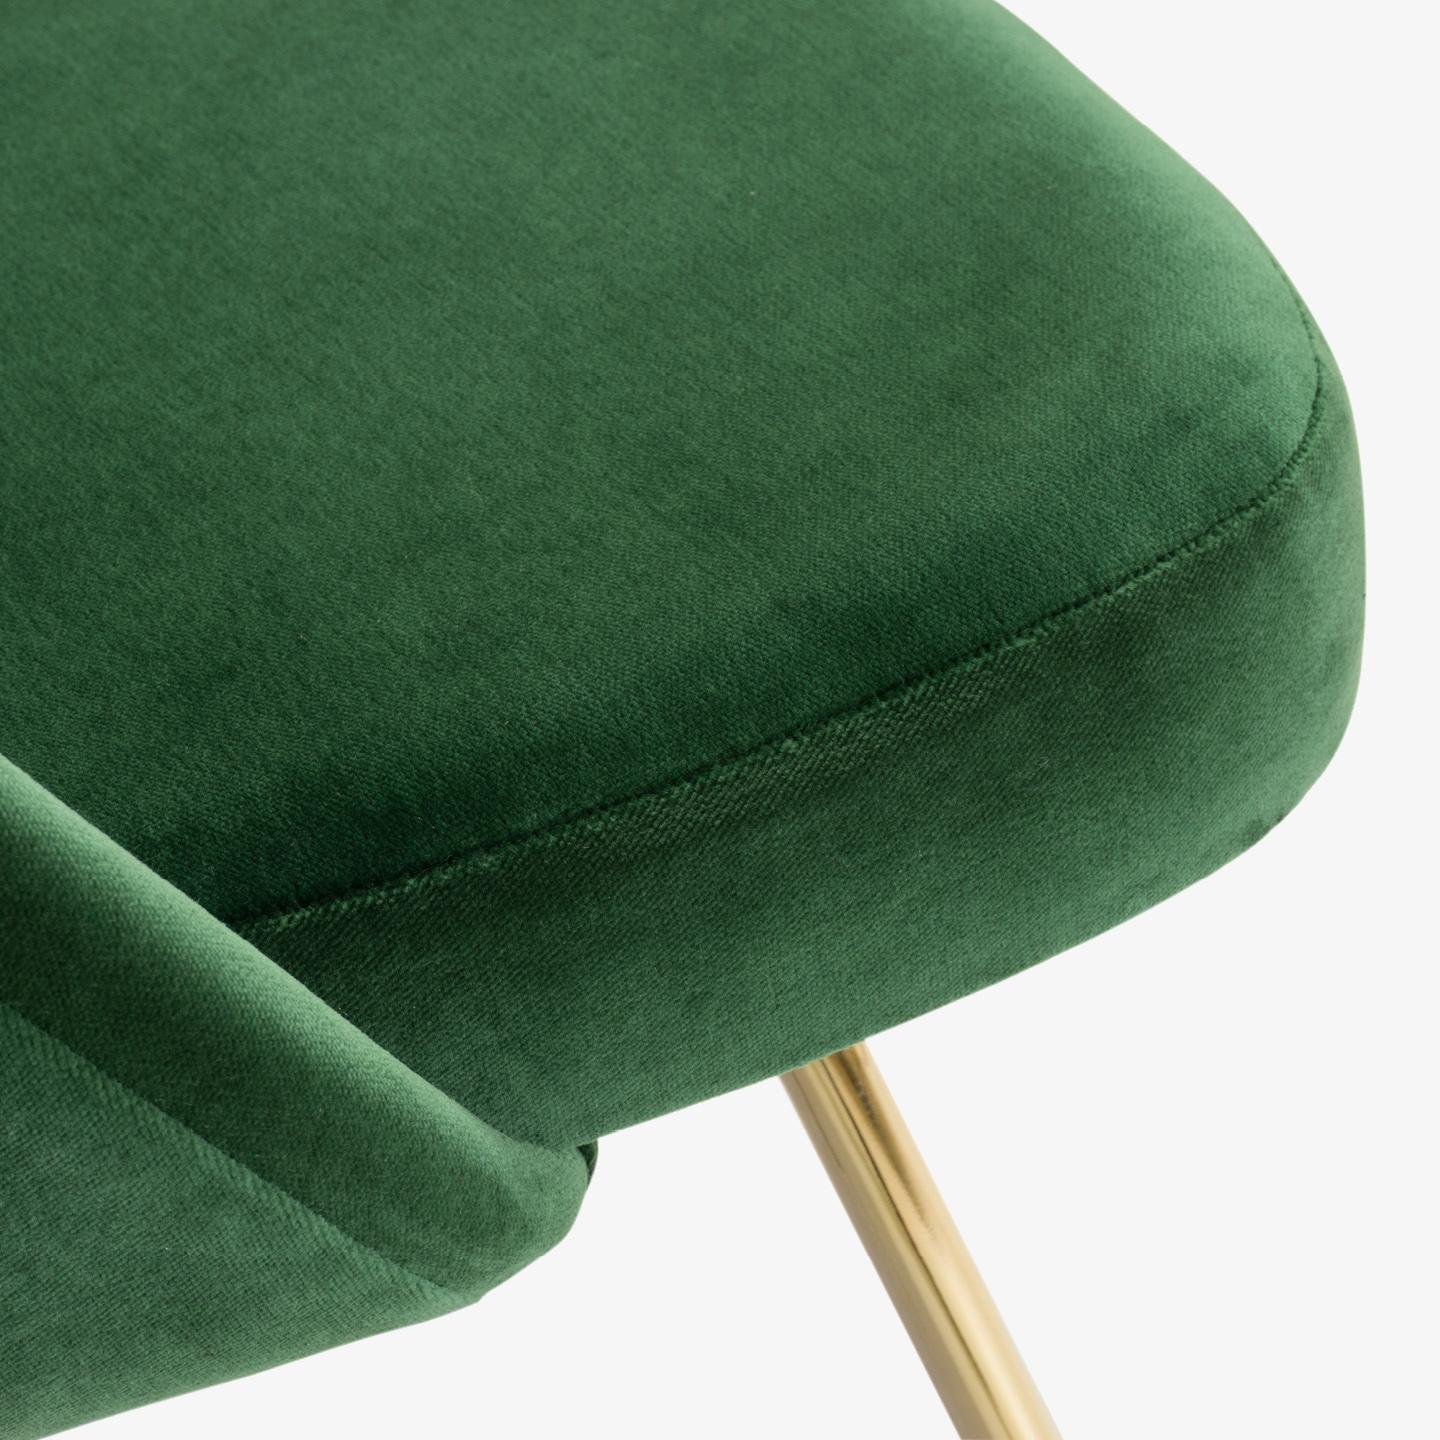 North American Saarinen Executive Armless Chair in Emerald Velvet, Gold Edition For Sale